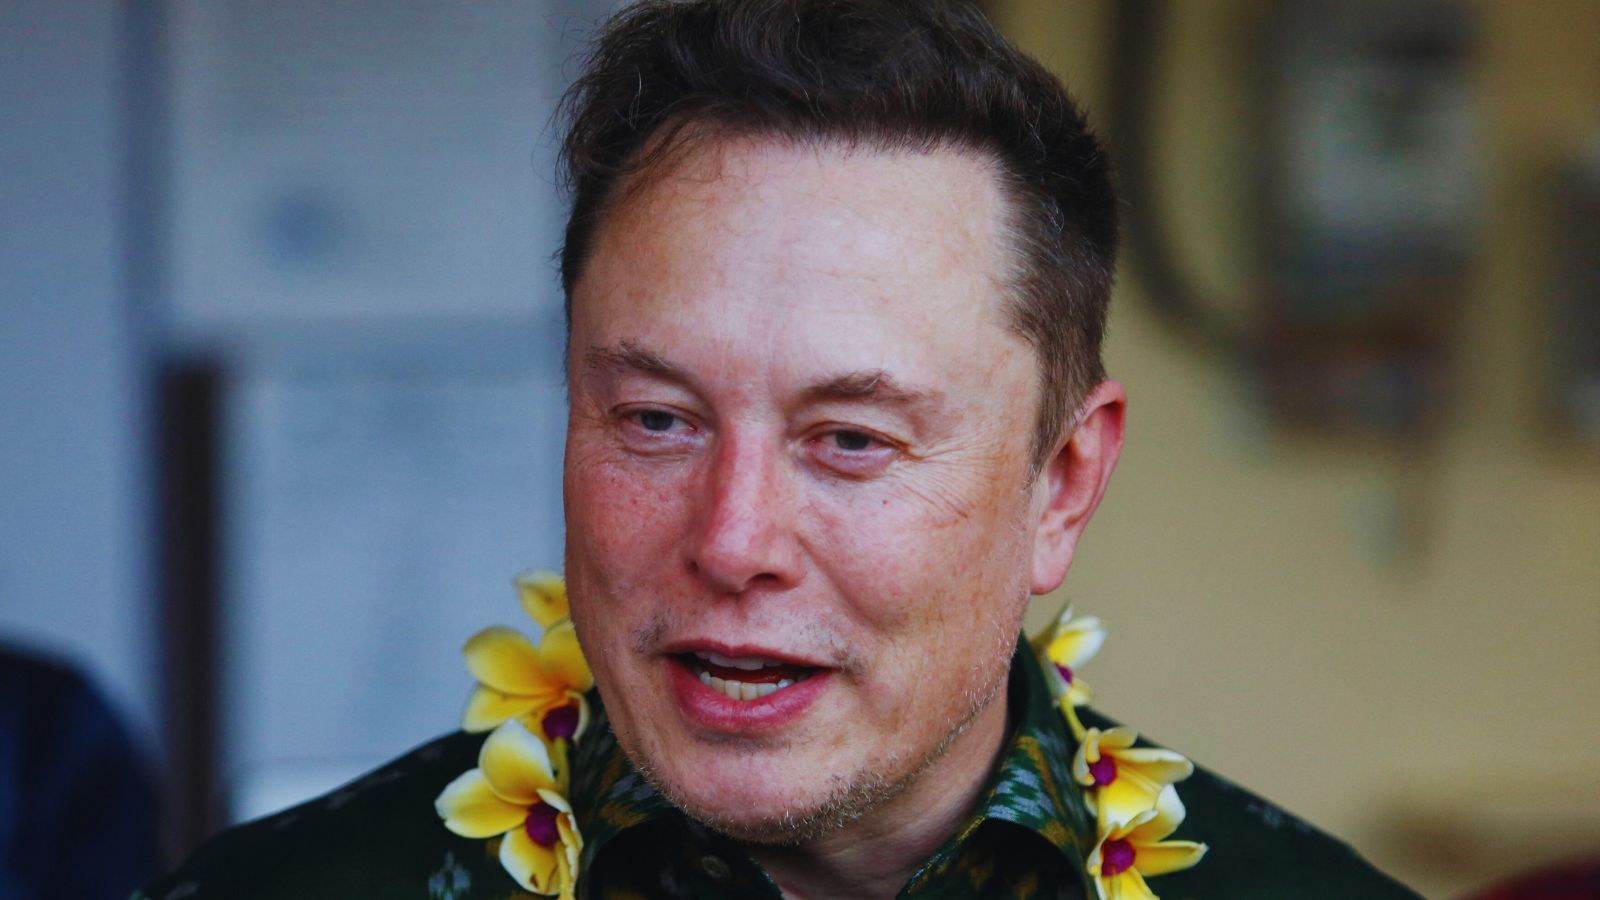 Elon Musk says rise of AI will make jobs ‘optional’ as AI robots will provide most services